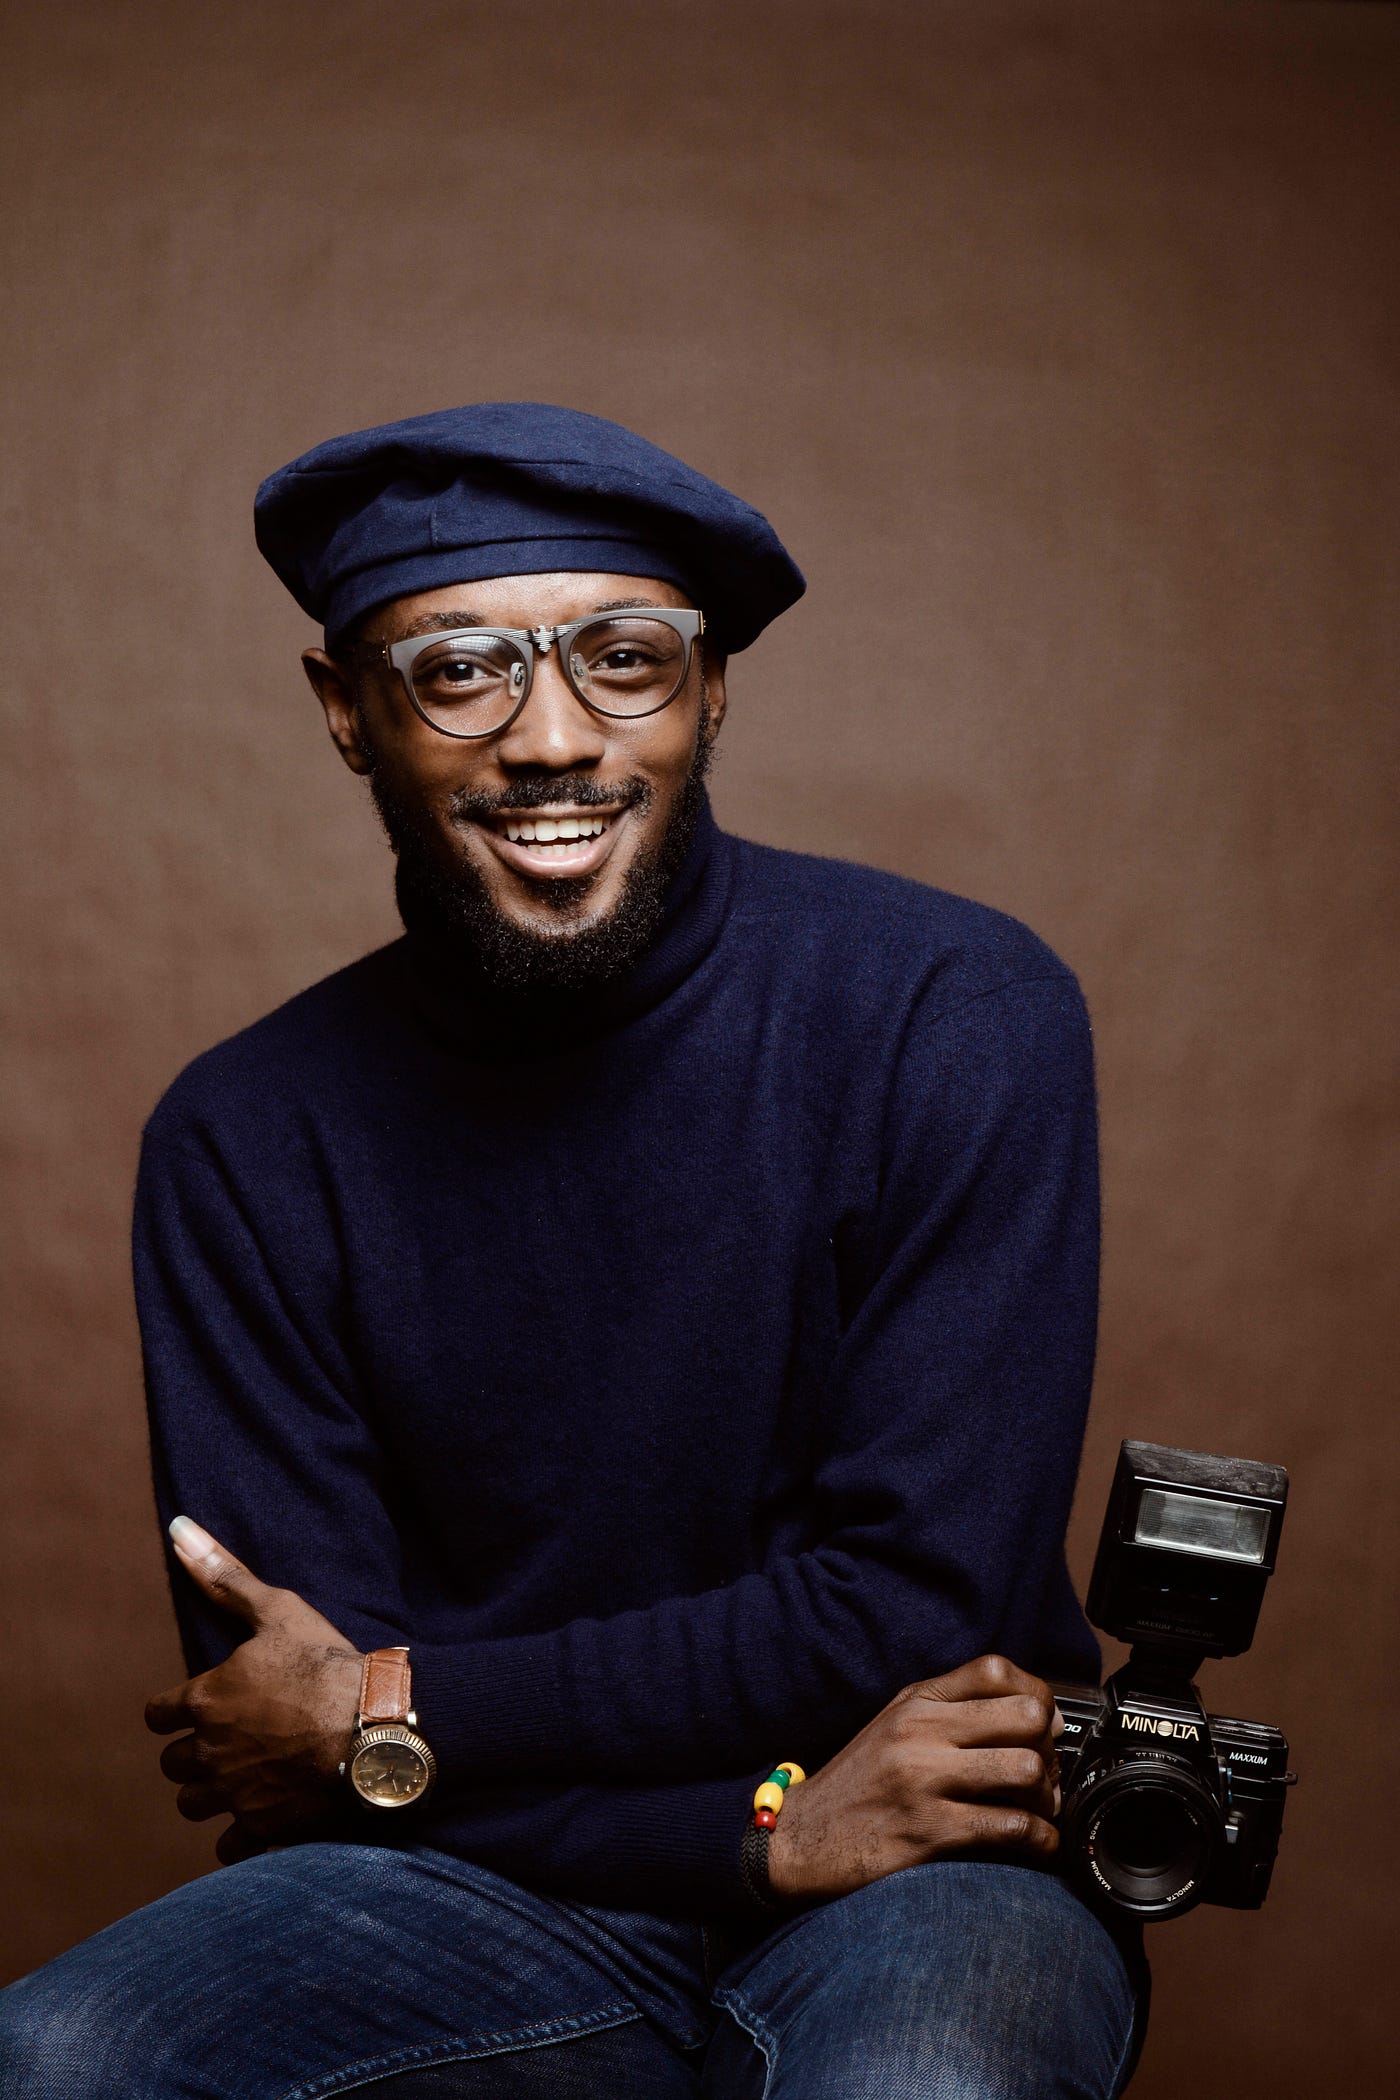 A middle-aged black man smiles at us. He wears a hat, glasses, and a dark blue turtleneck. African American men have a higher prostate cancer risk and should talk to their healthcare professionals about screening at age 45. Prostate cancer screening includes a blood test known as a PSA (prostate specific antigen).